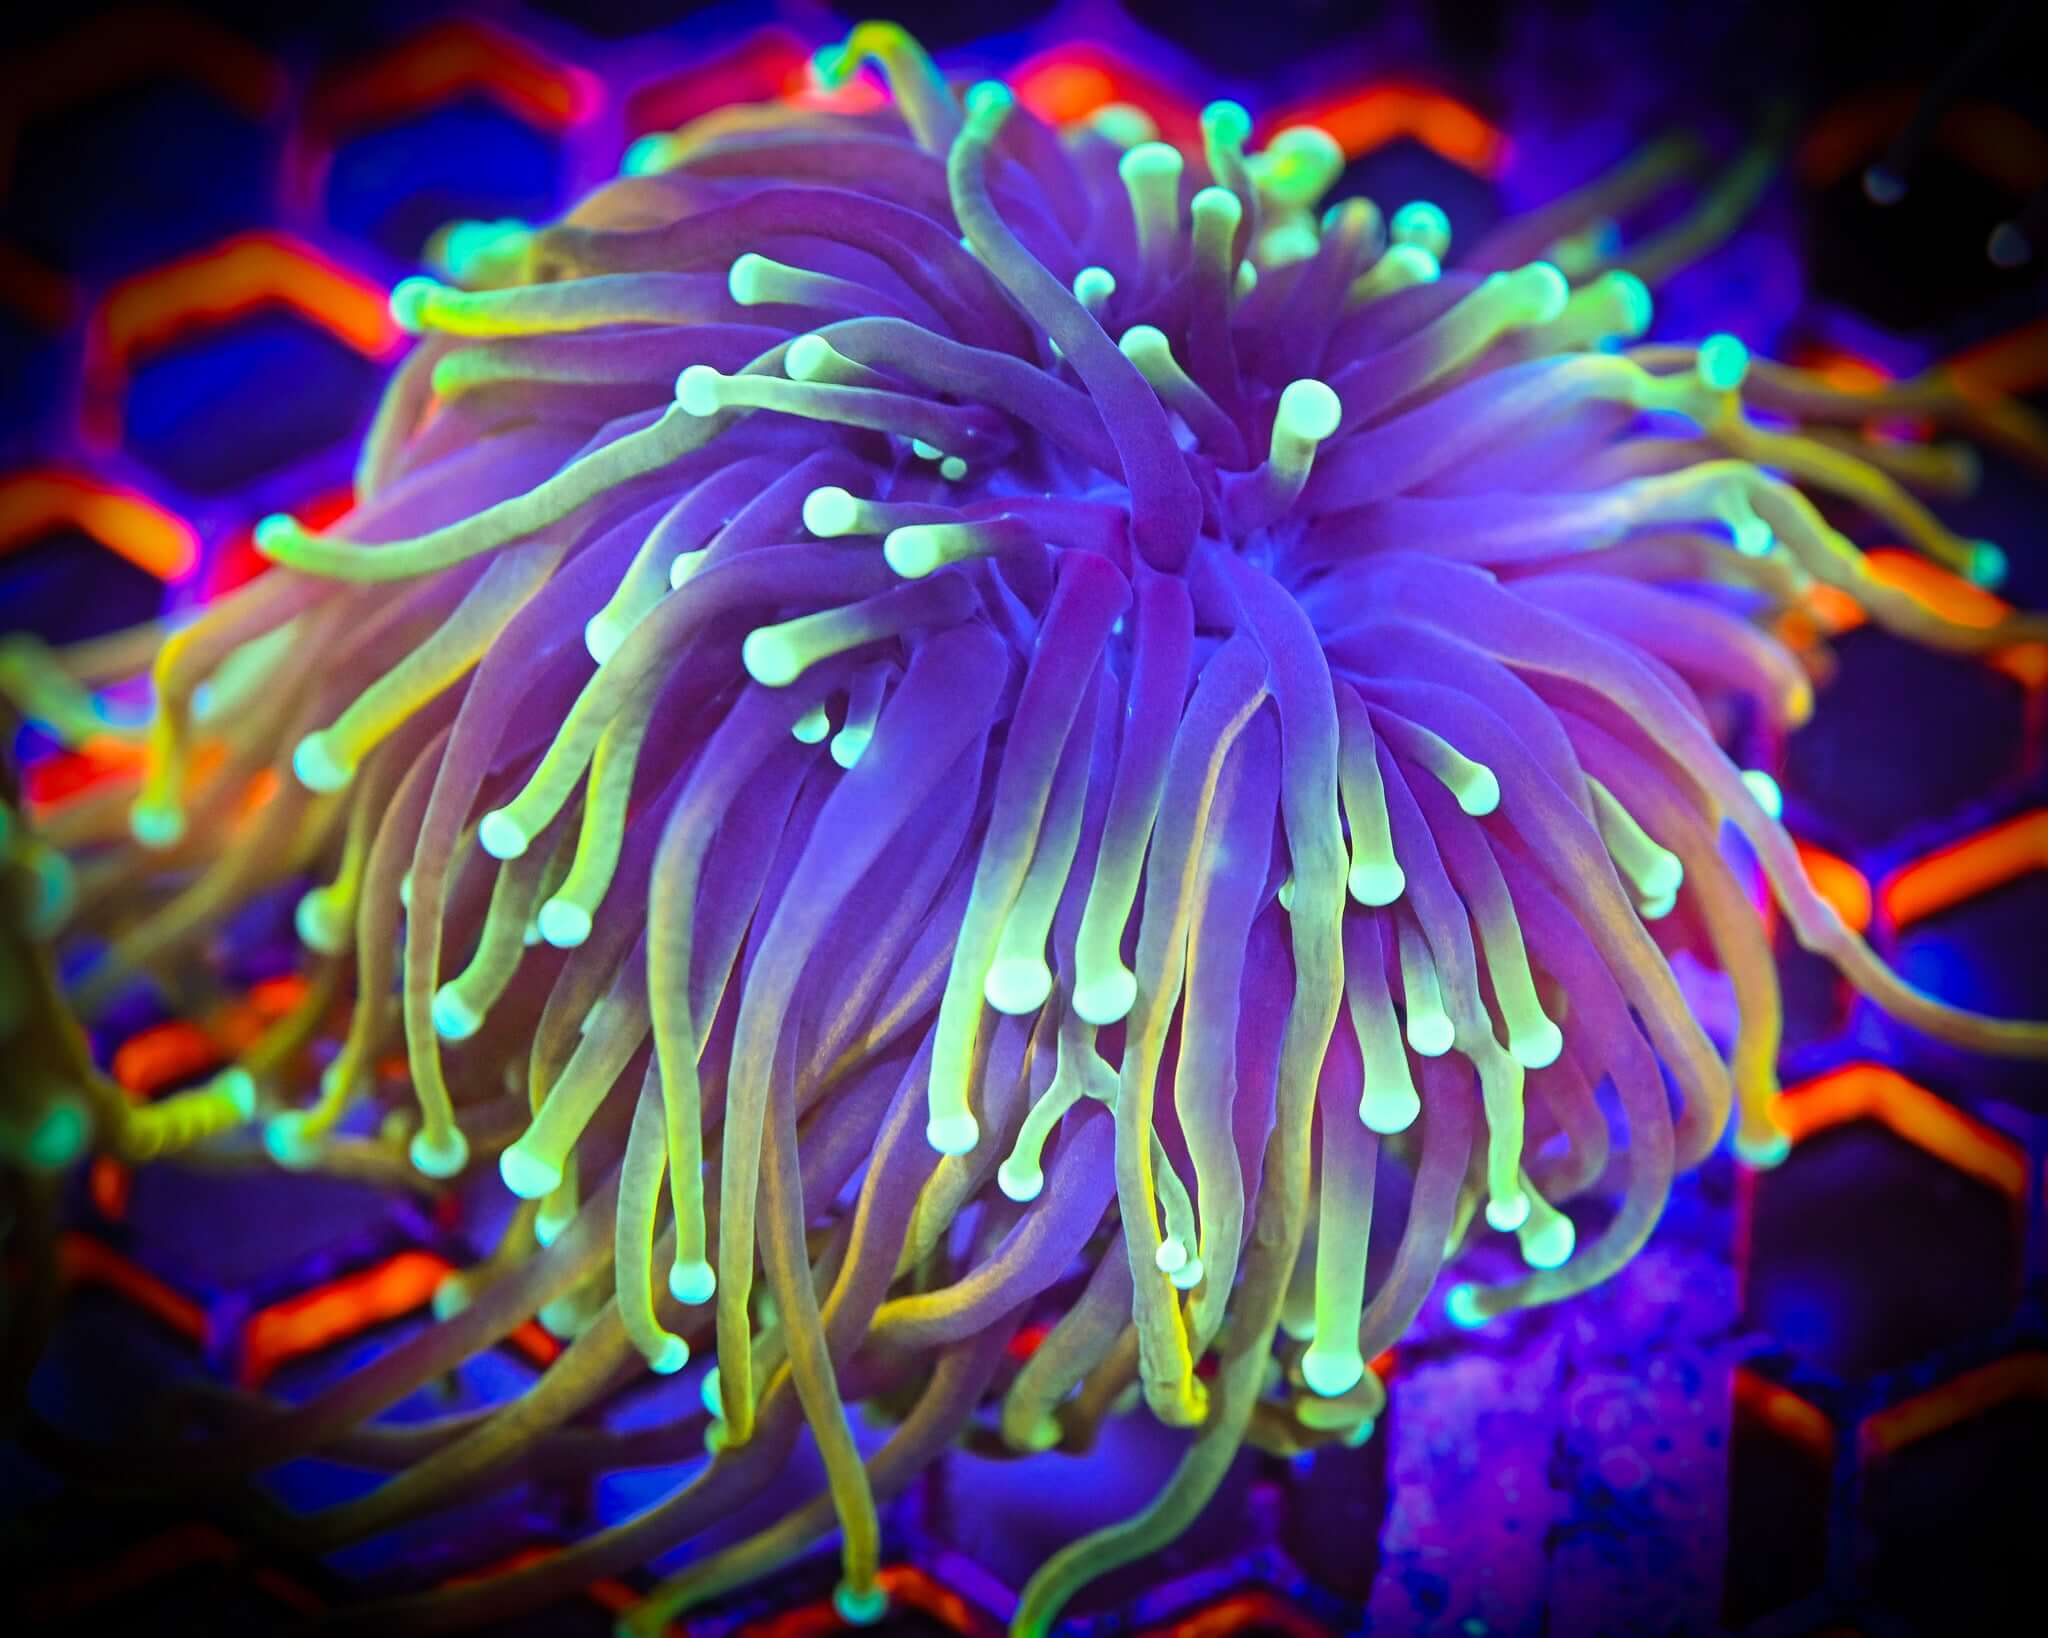 Vibrant Hellfire Torch coral with neon tips in excellent condition. For more details, visit our Coral Care Blog. Moderate (100-150 PAR) care.